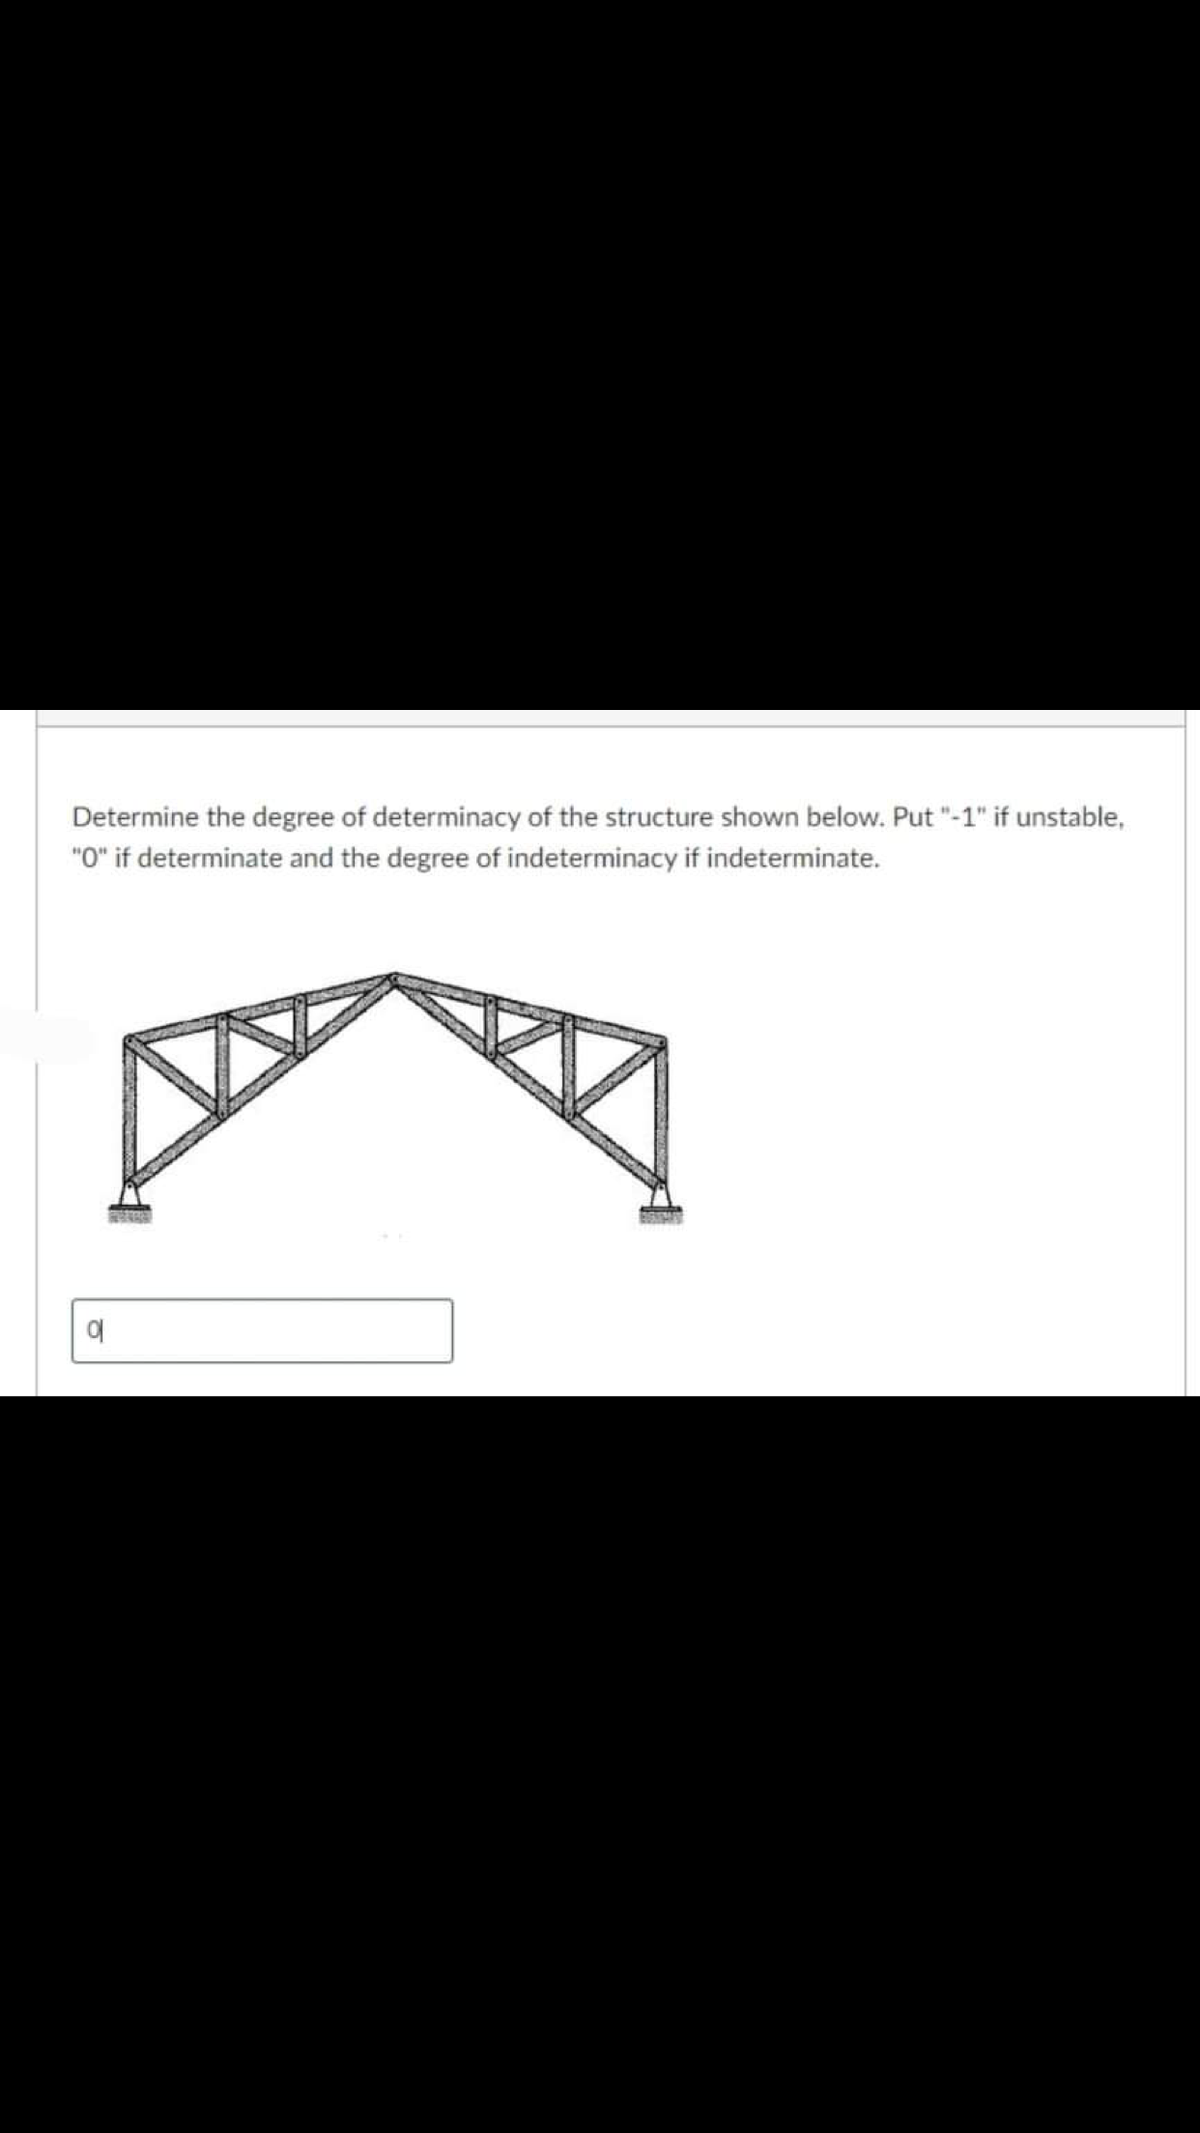 Determine the degree of determinacy of the structure shown below. Put "-1" if unstable,
"O" if determinate and the degree of indeterminacy if indeterminate.
